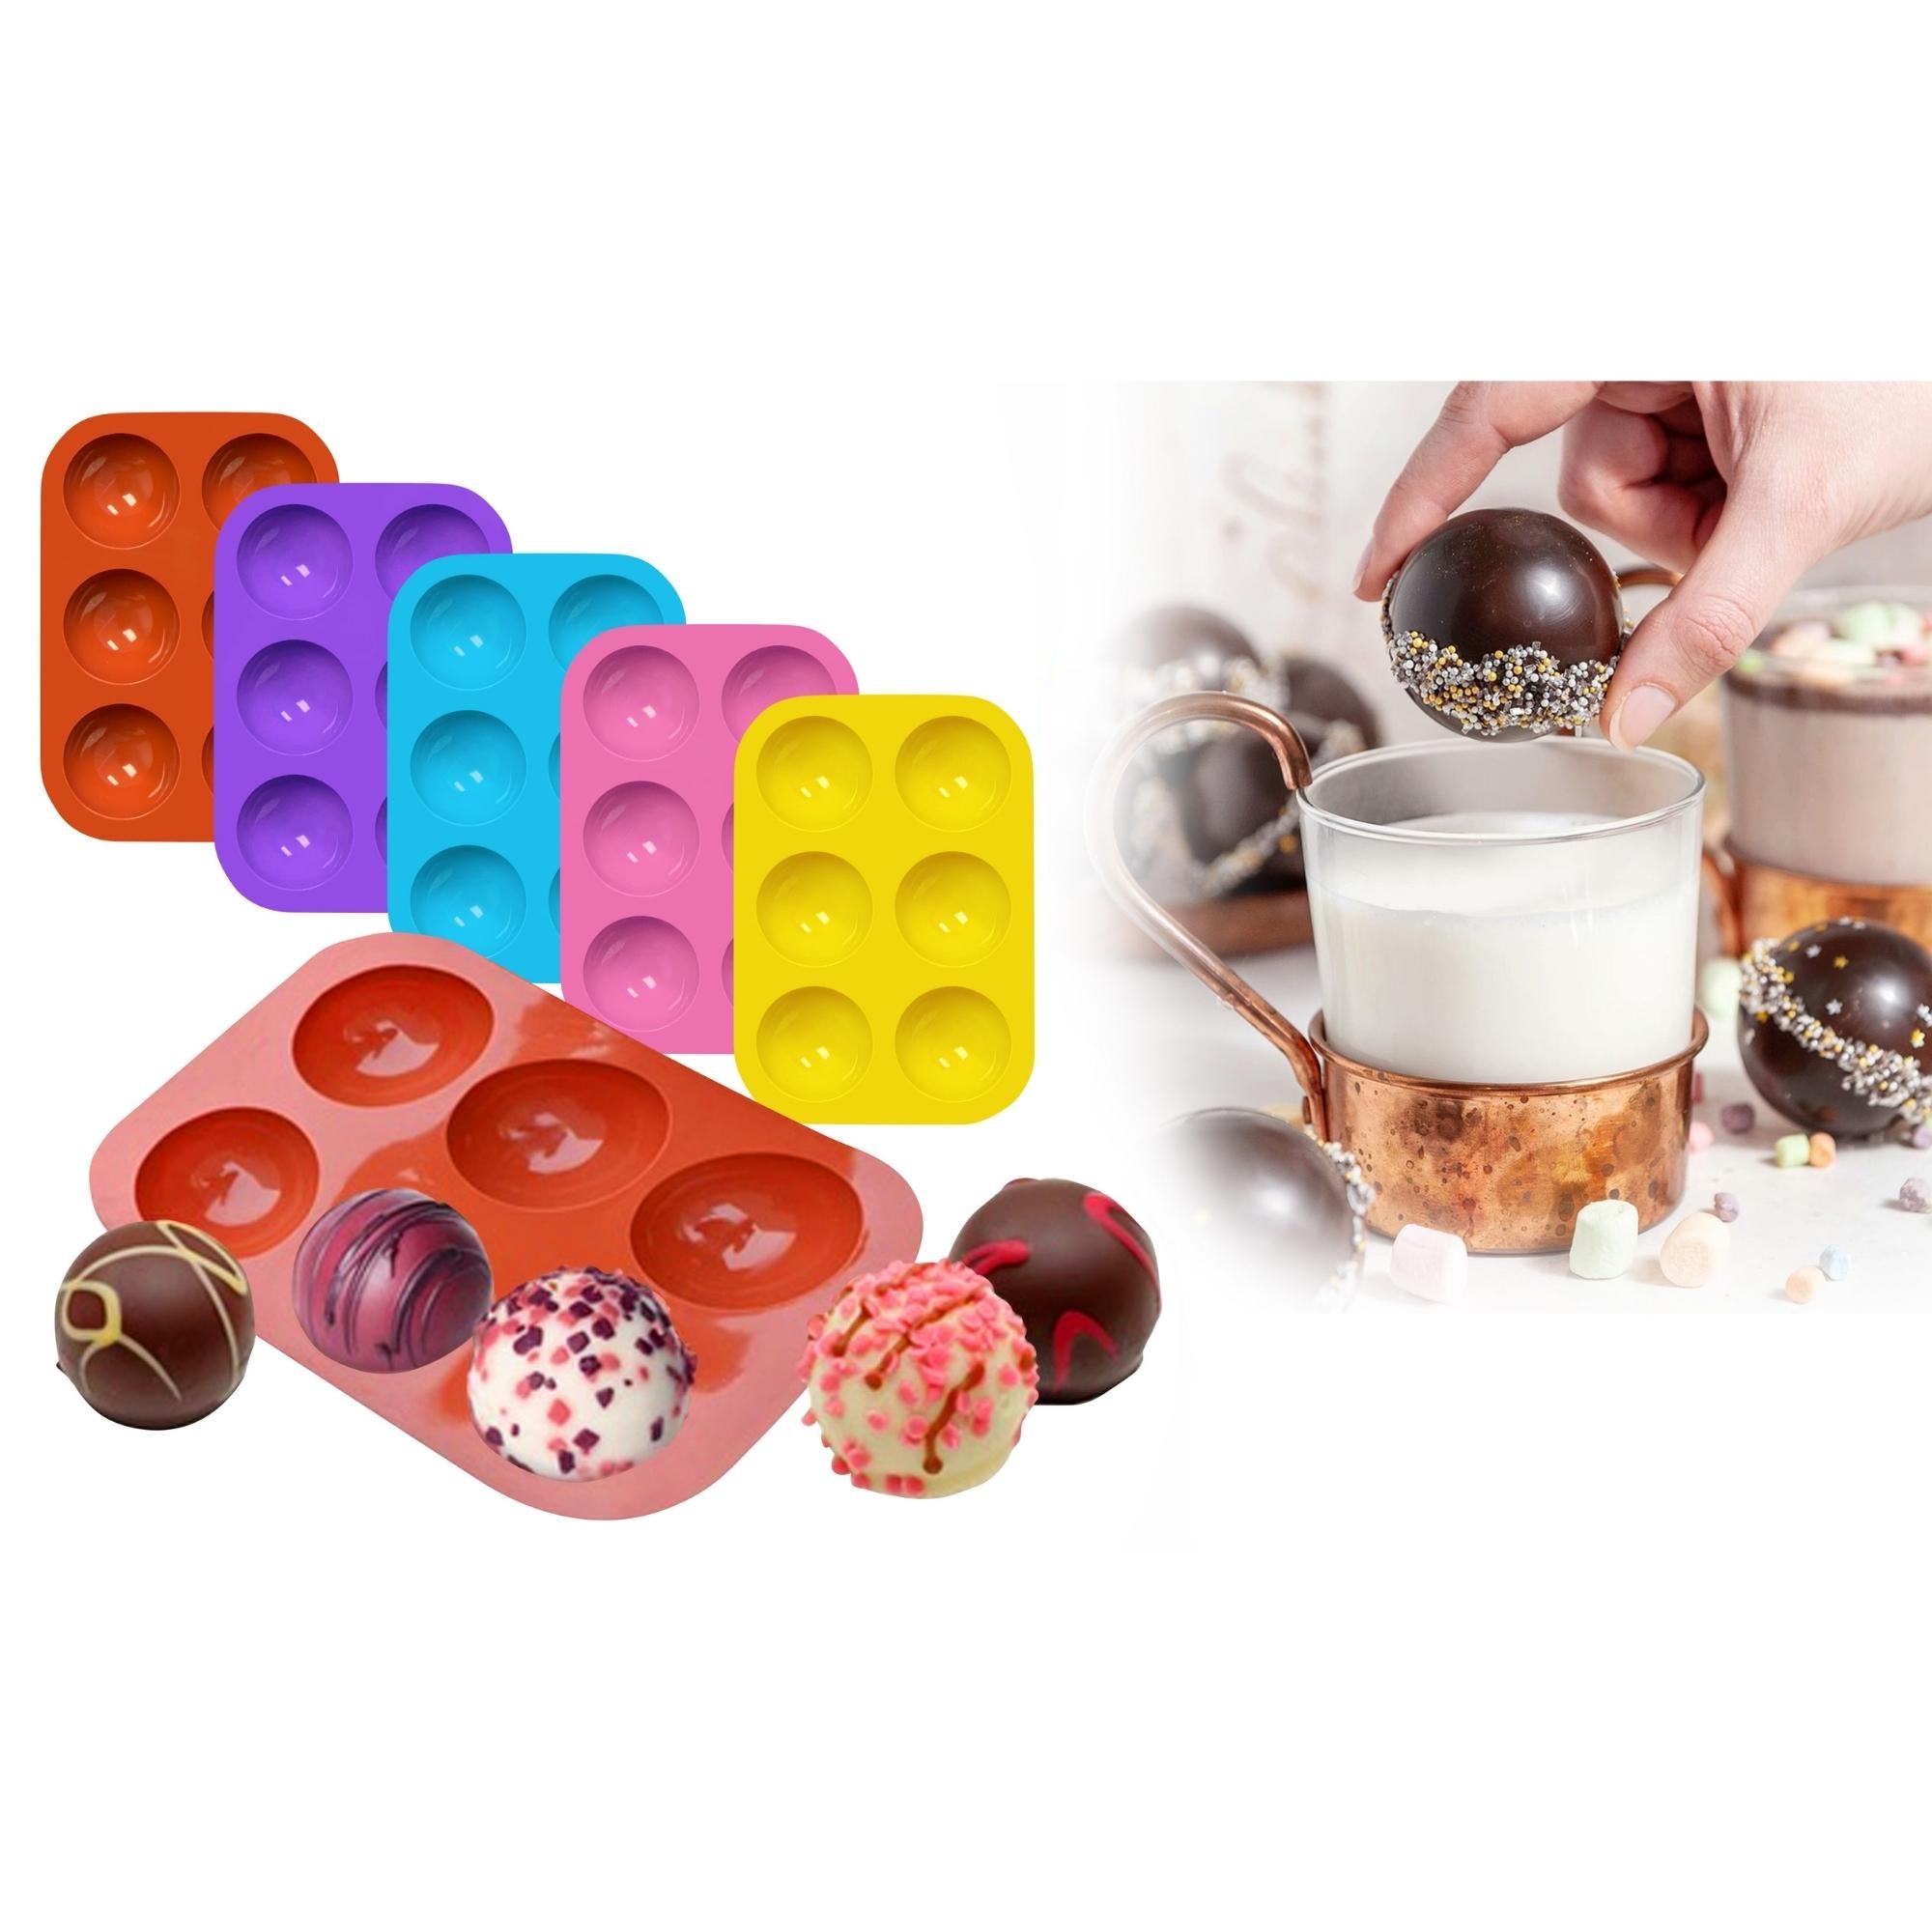 XL Chocolate Bomb Molds - 5 Colors